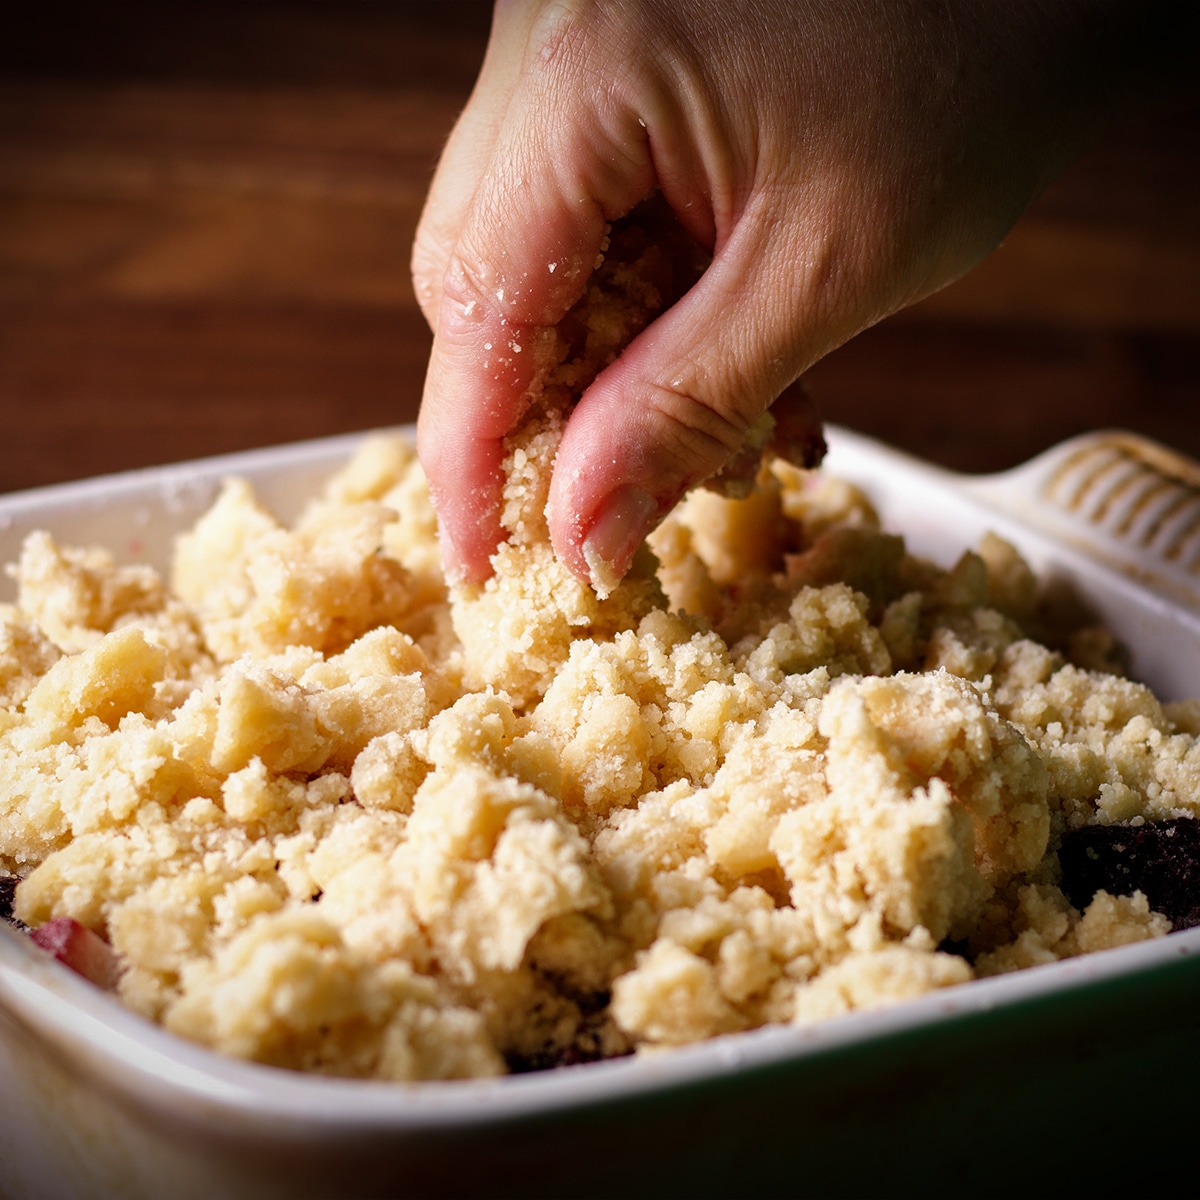 Someone using their fingers to distribute the topping for berry cobbler over the mixed berry filling.